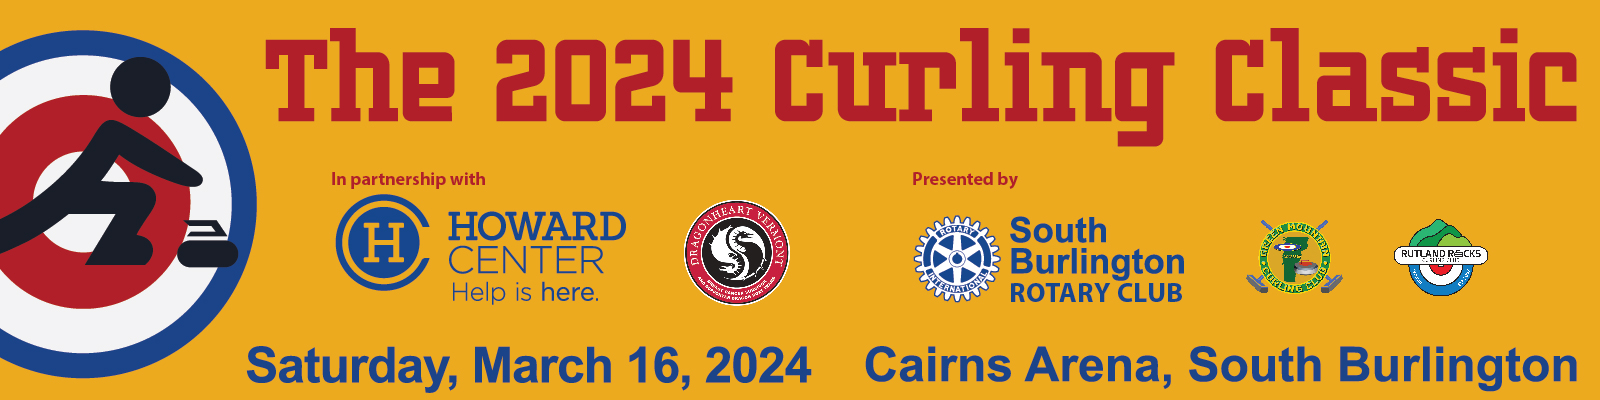 2024 curling classic graphic with an image of a stick figure curling, the text says: Saturday March 16, 2024 at Carins Arena in South Burlington, 8 am to 6 pm.